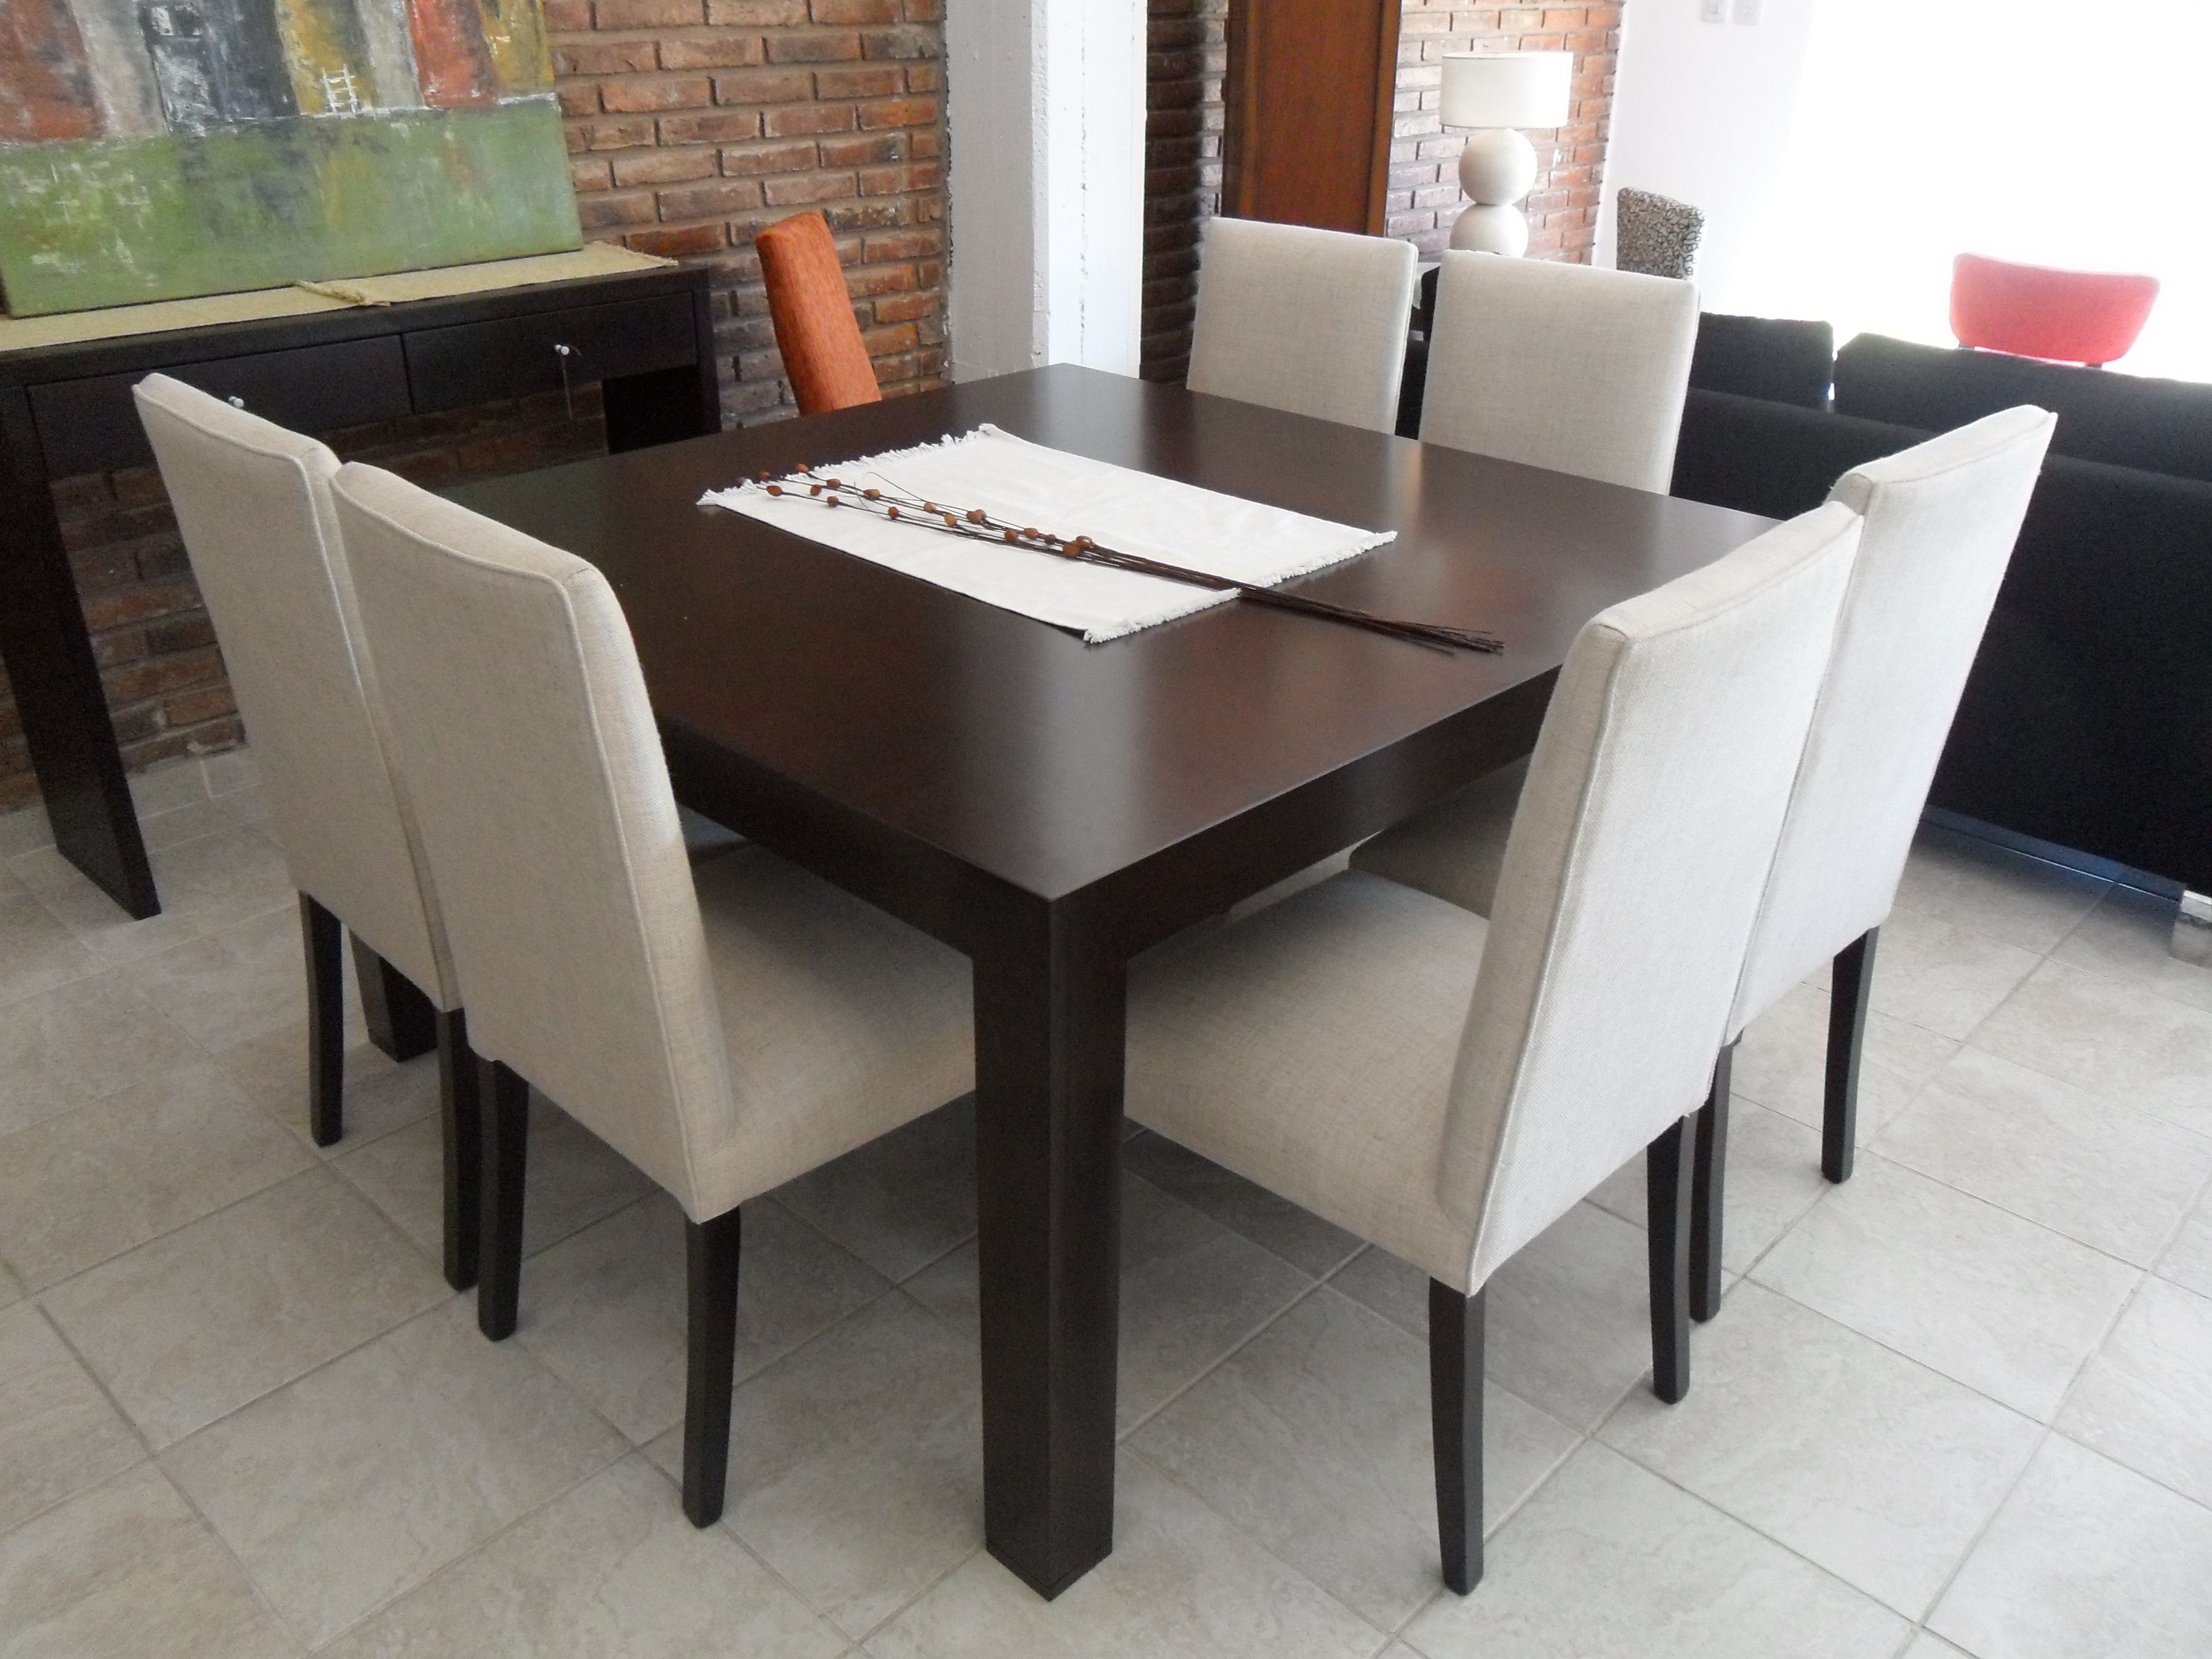 Custom Made Dining Set - Delivered by dubizzle! - FD113-image